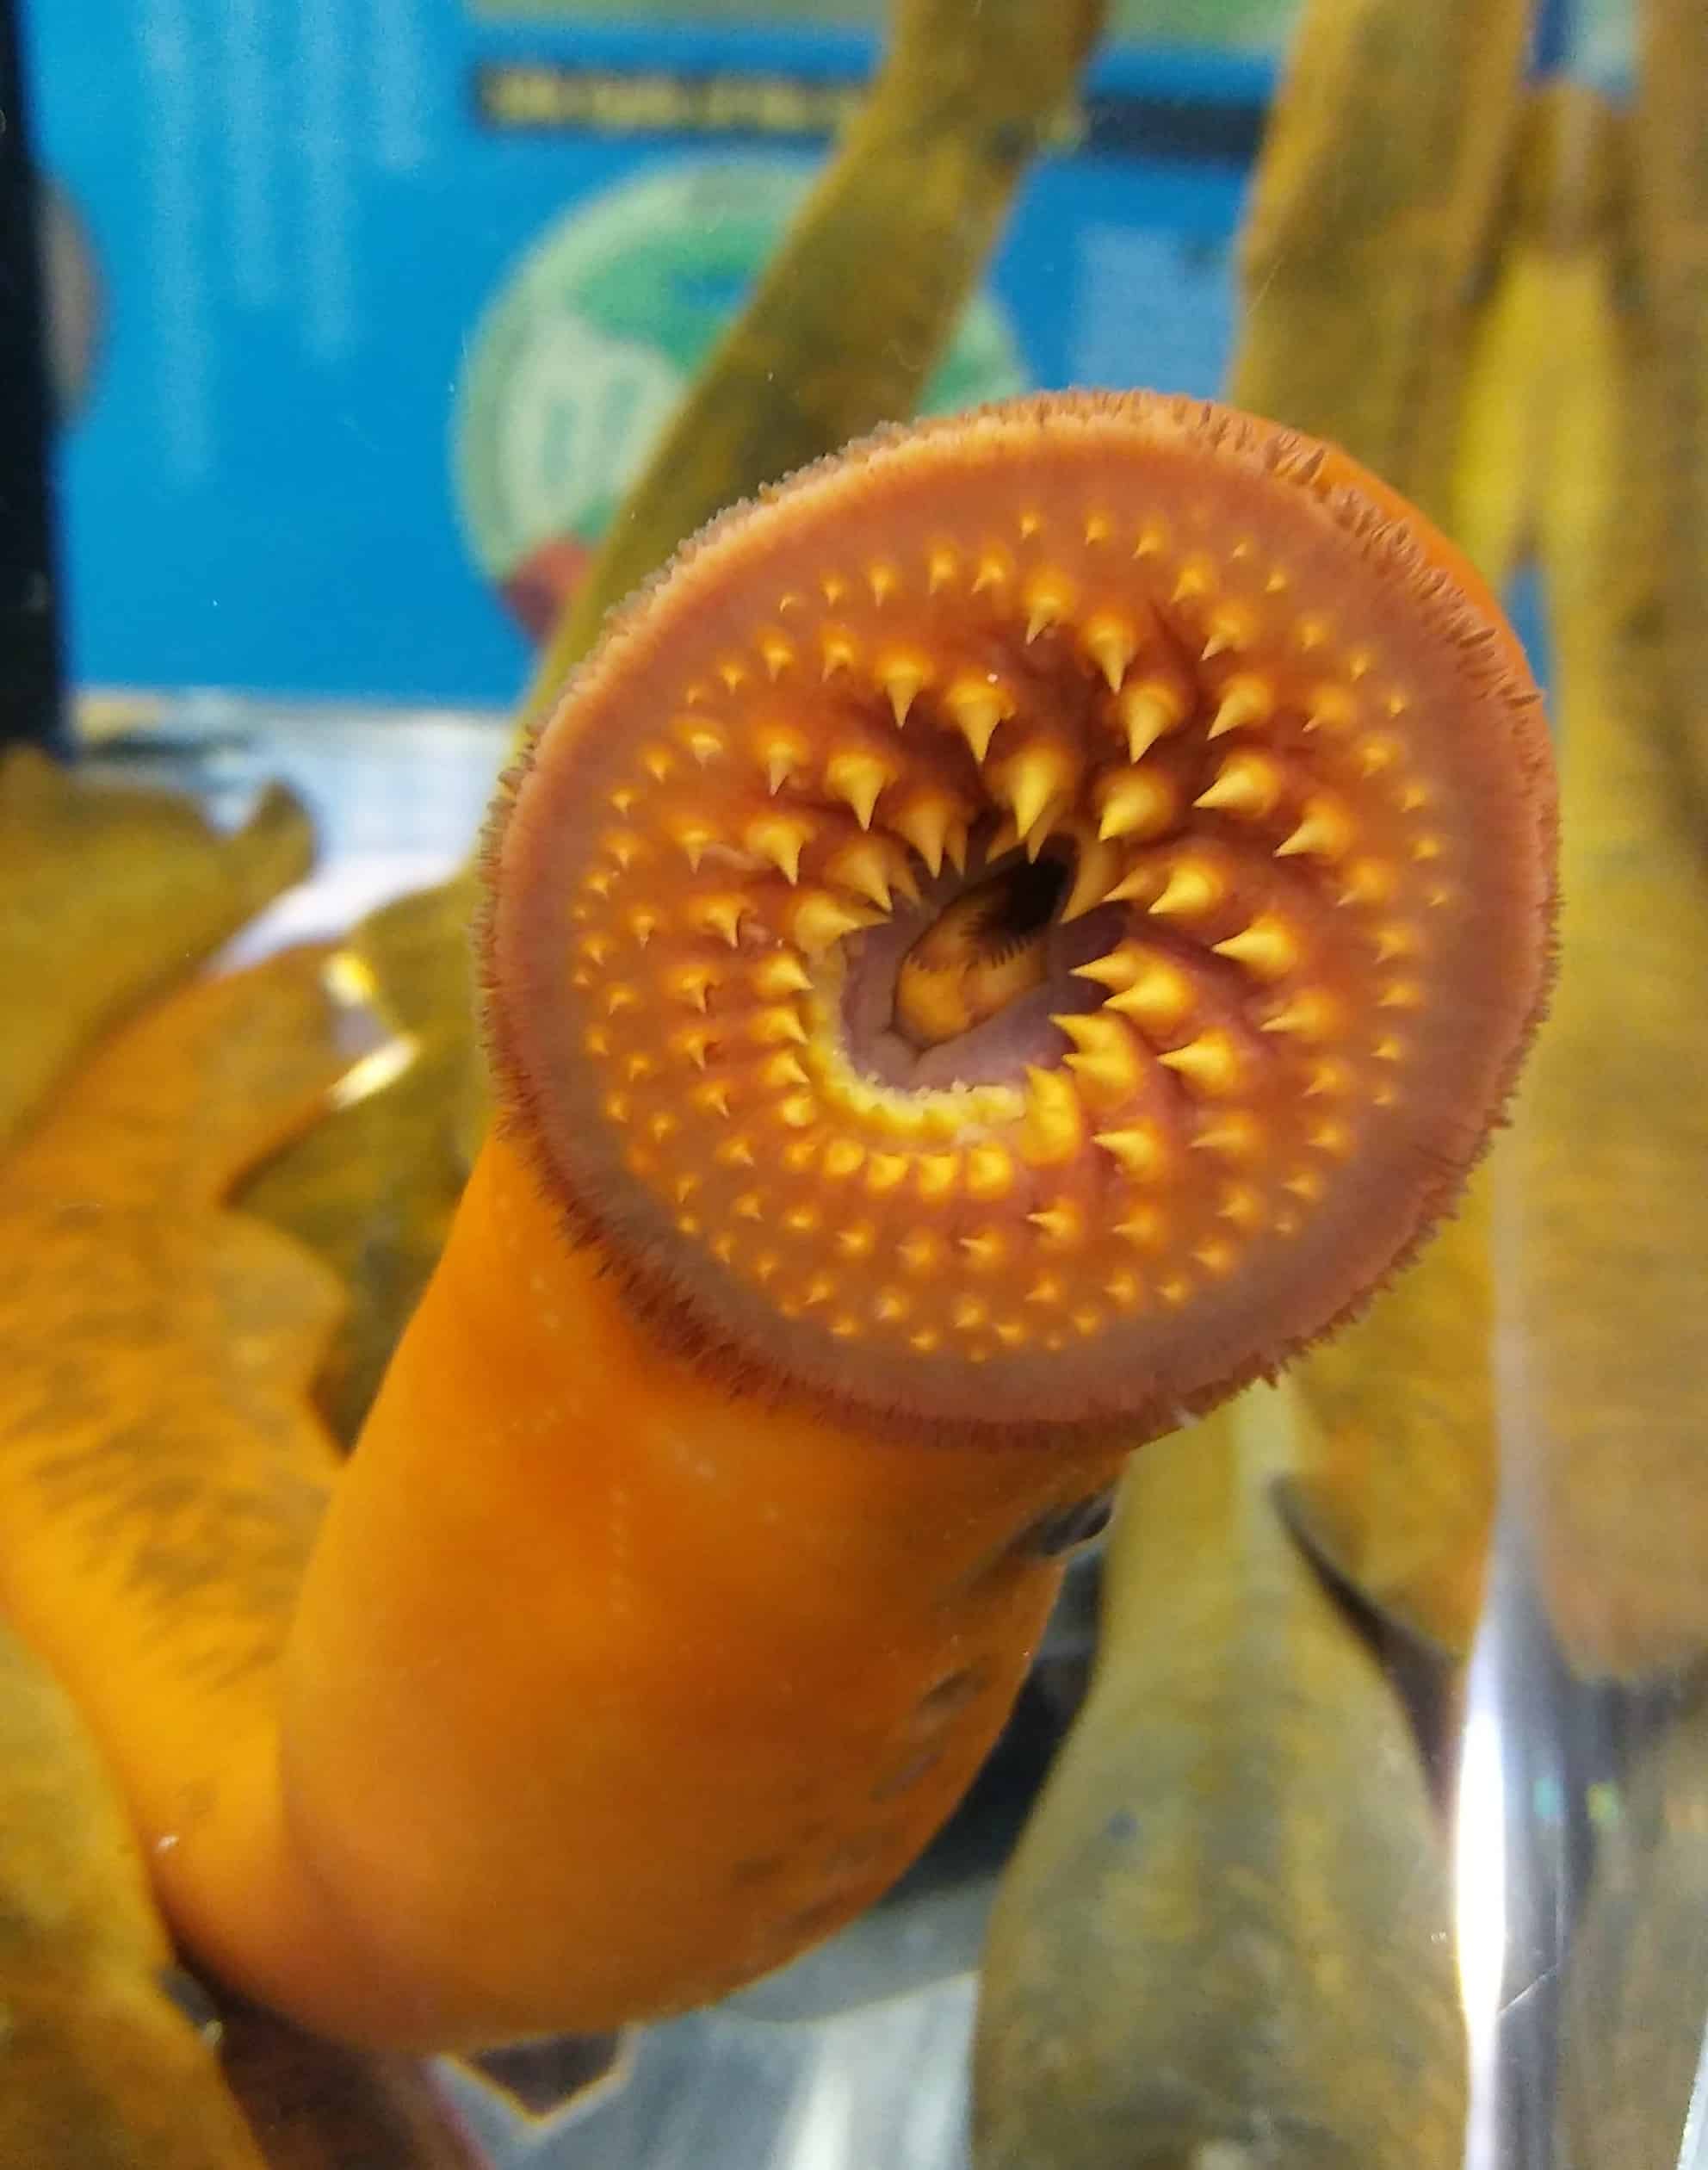 Orange lamprey ell center frame. Its mouth is fully exposed. All of its teeth are visible. The y are in circular rows.